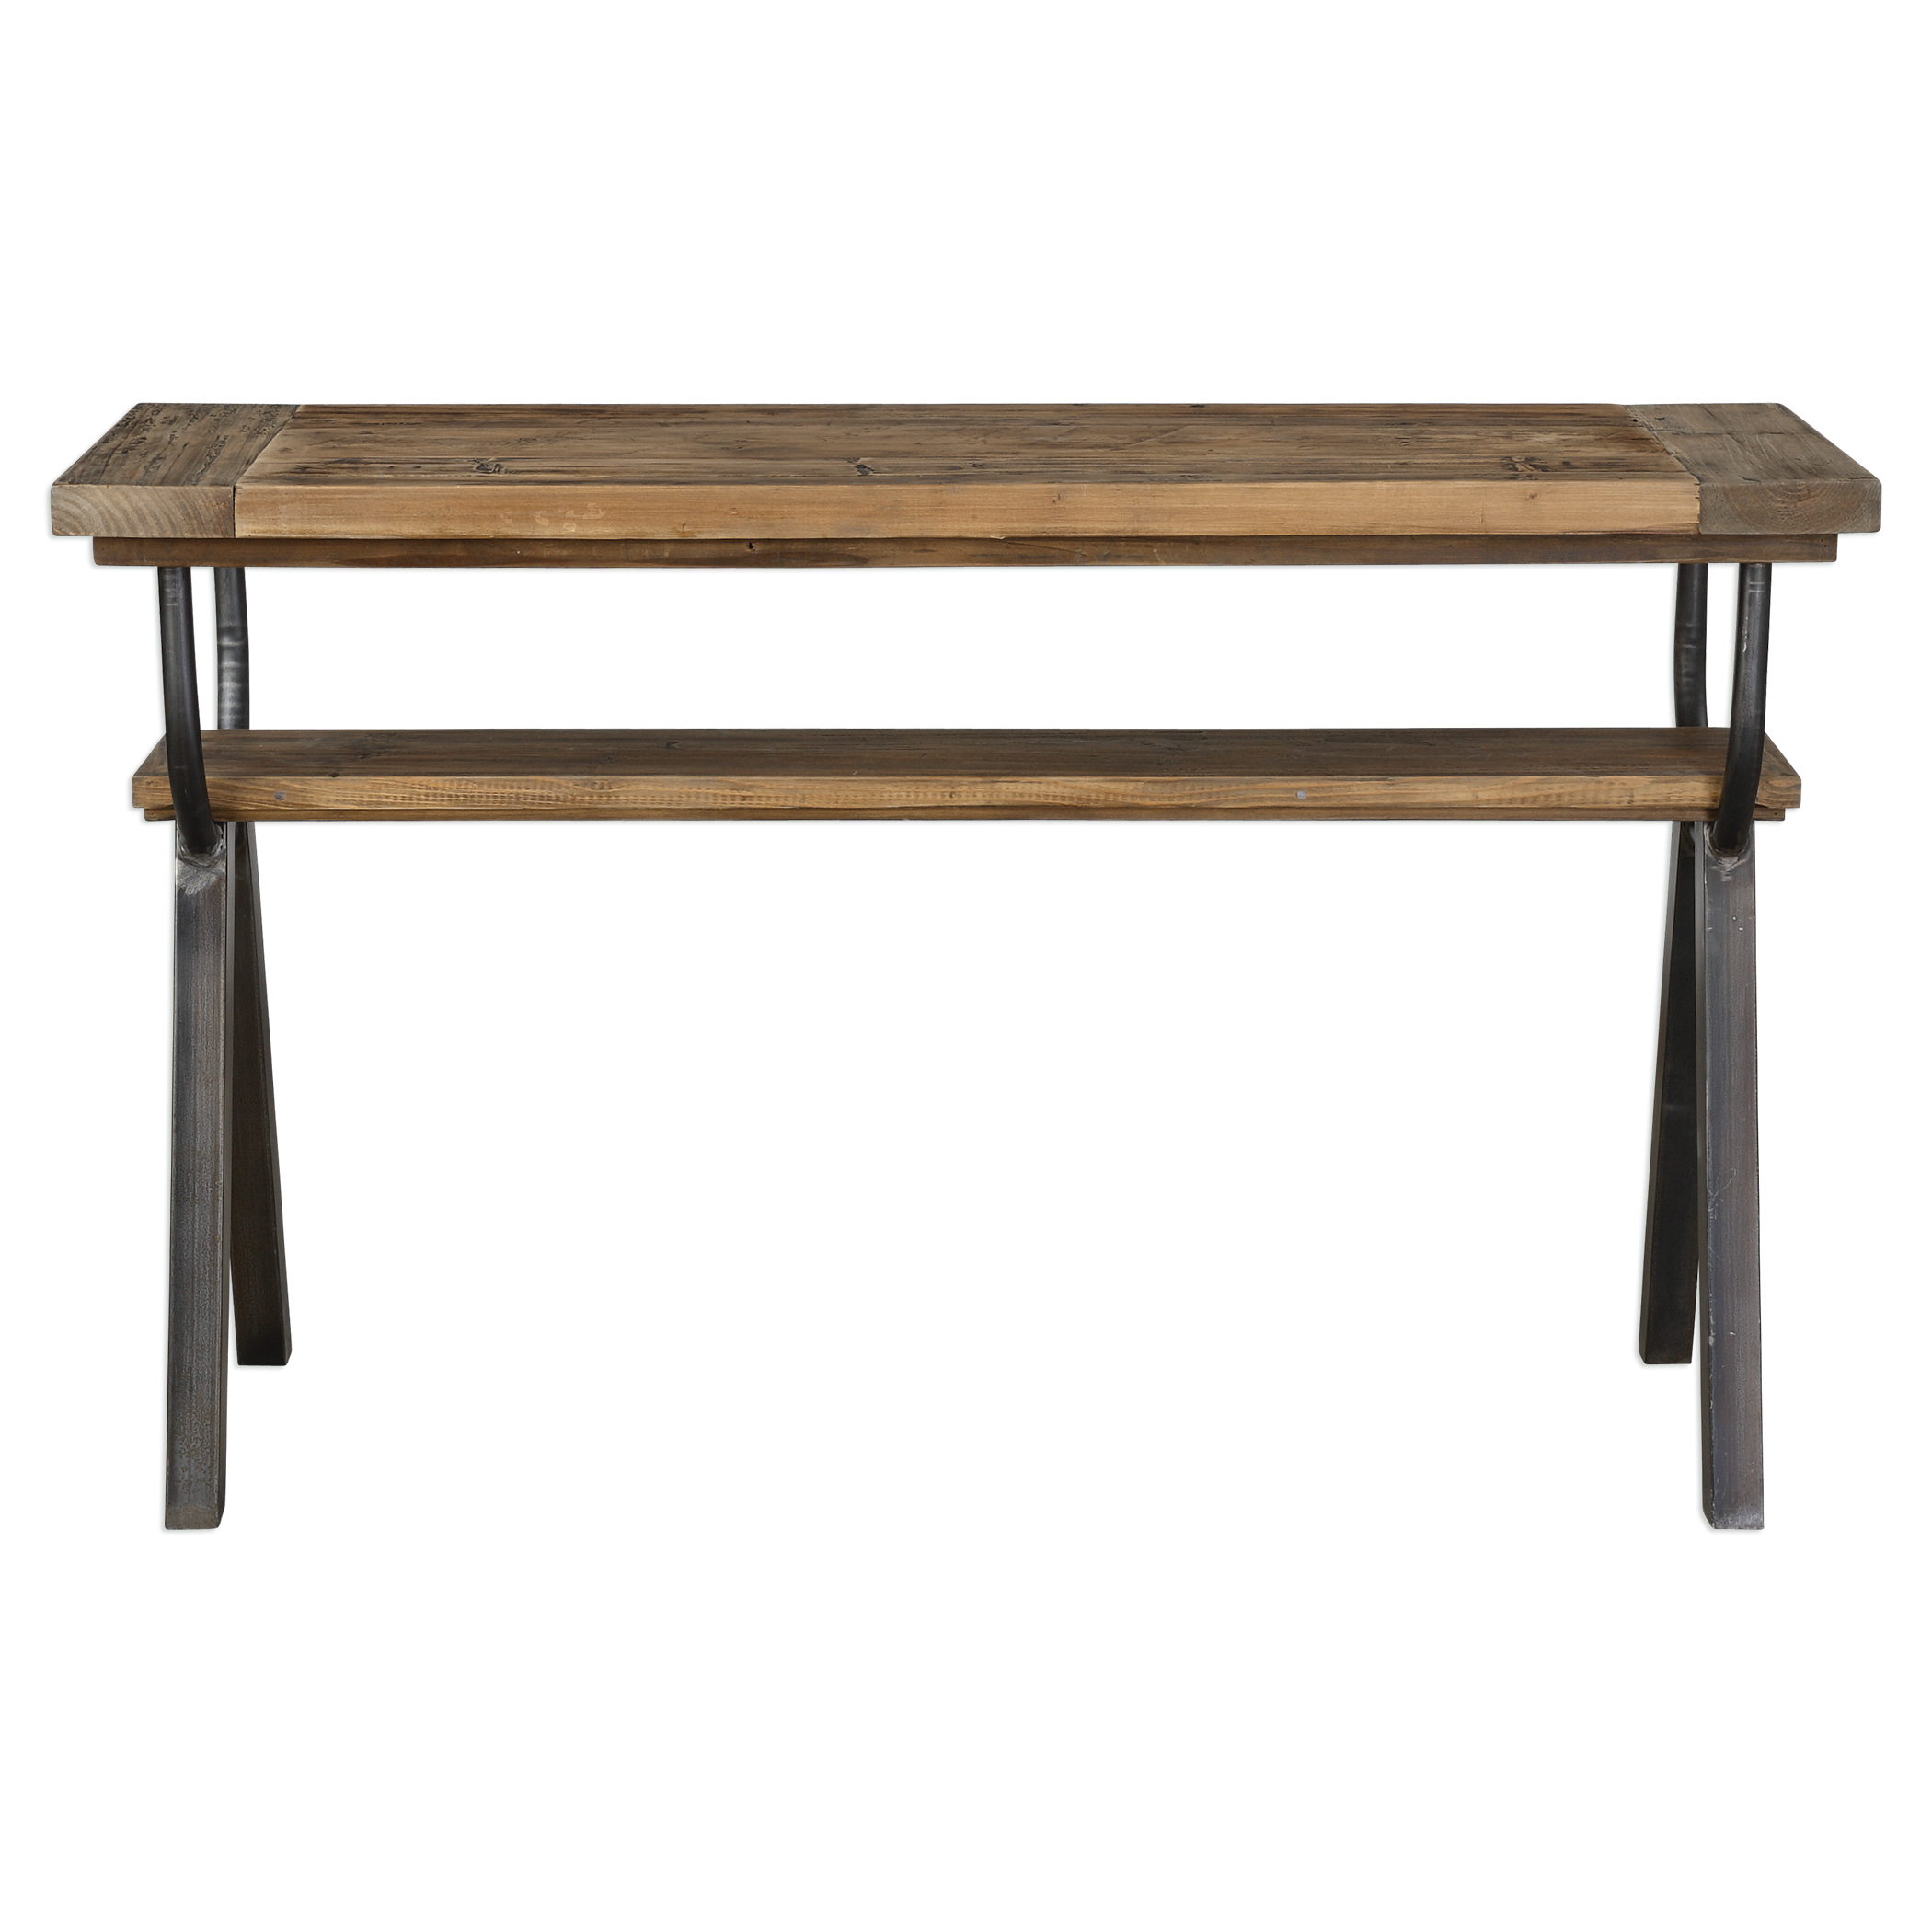 Online Designer Combined Living/Dining Domini Industrial Console Table